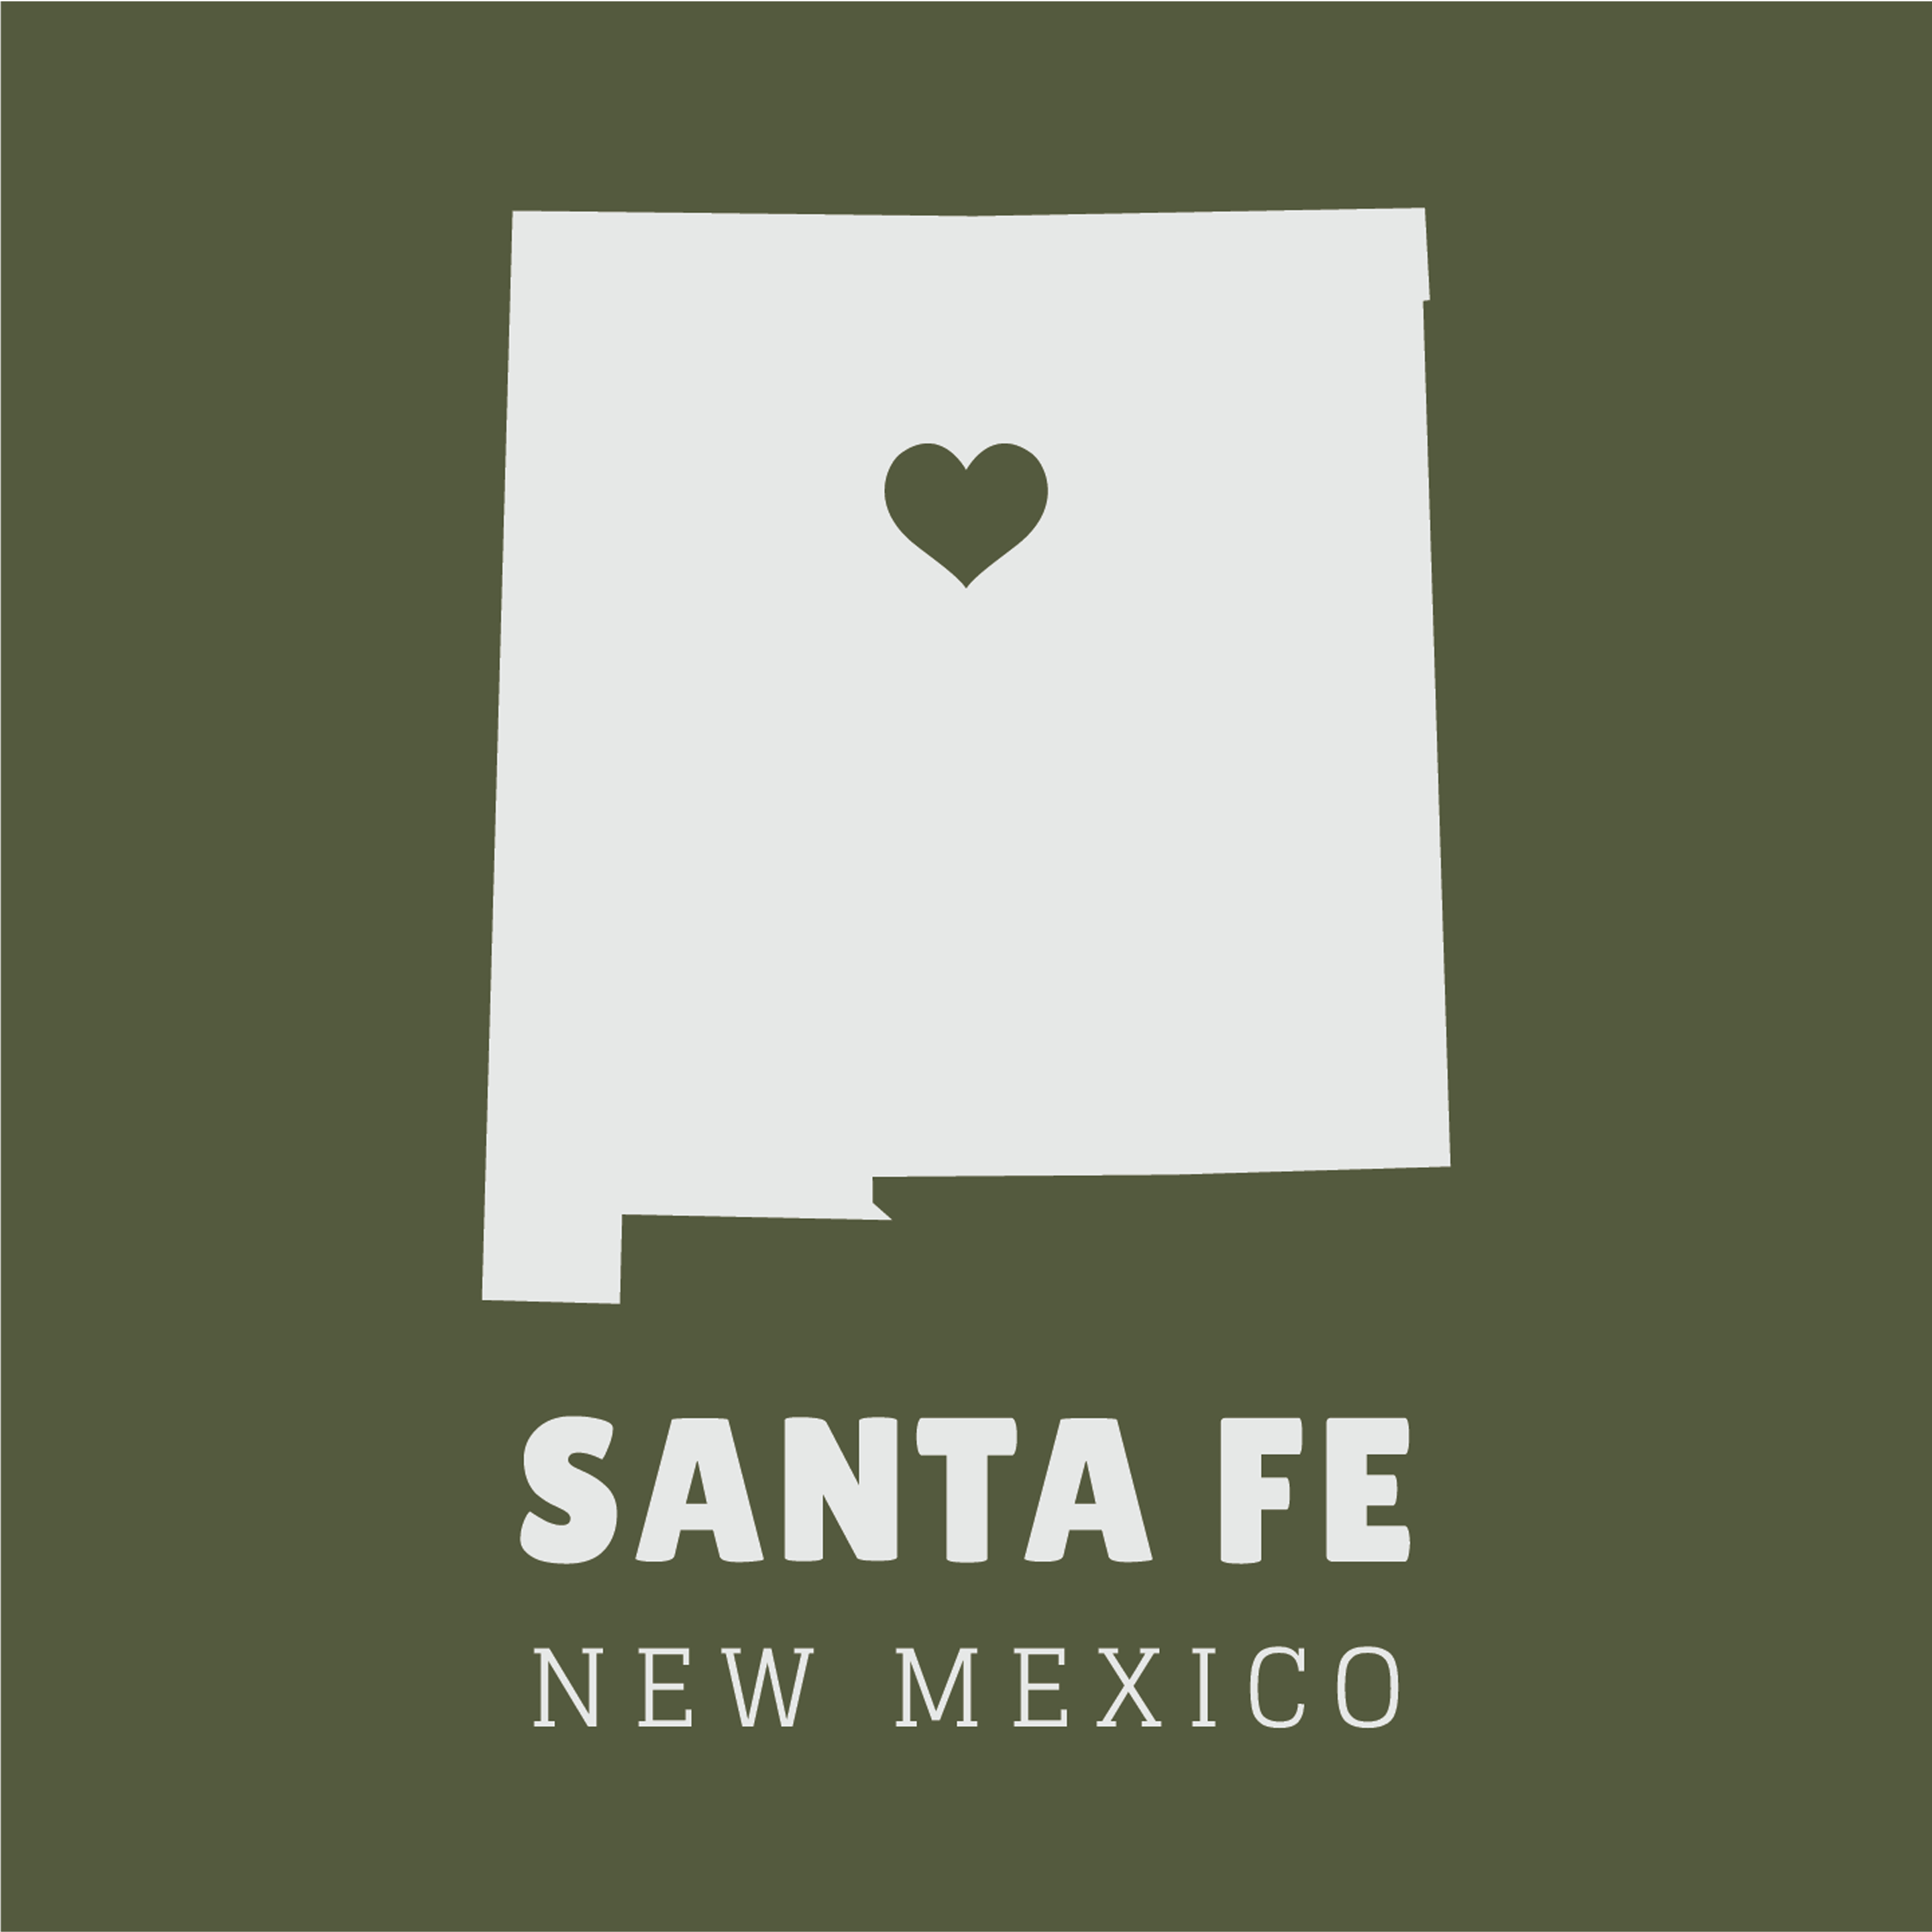 state-vector-heart-new-mexico-design-theme